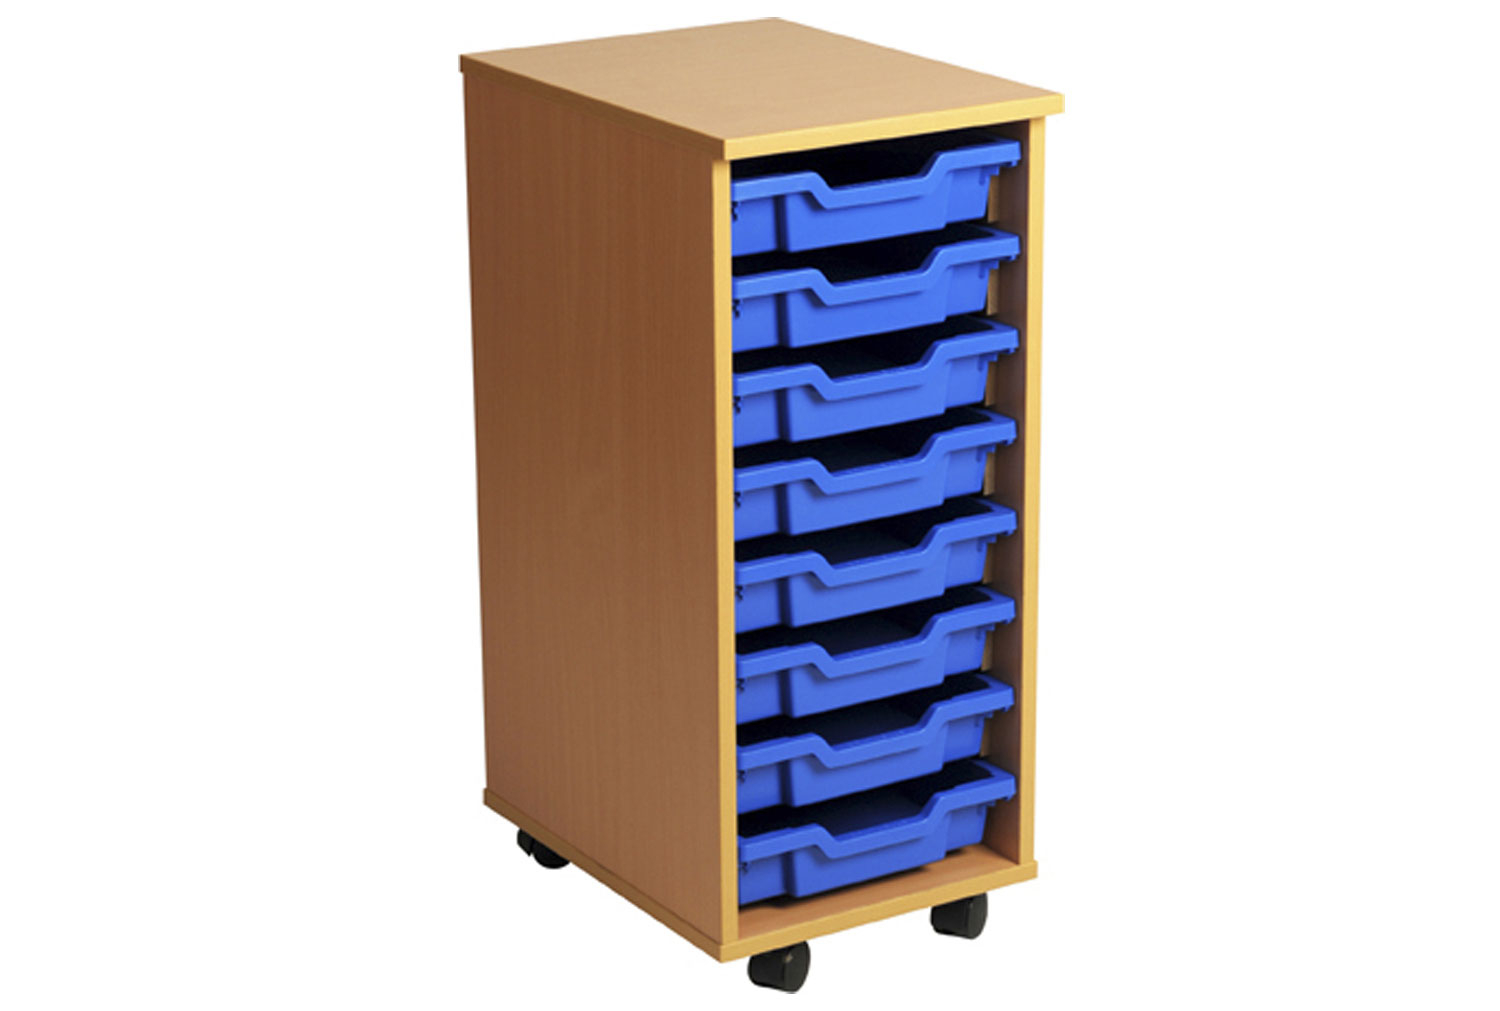 Primary Single Column Mobile Classroom Tray Storage Unit With 8 Shallow Classroom Trays, Beech/ Blue Classroom Trays